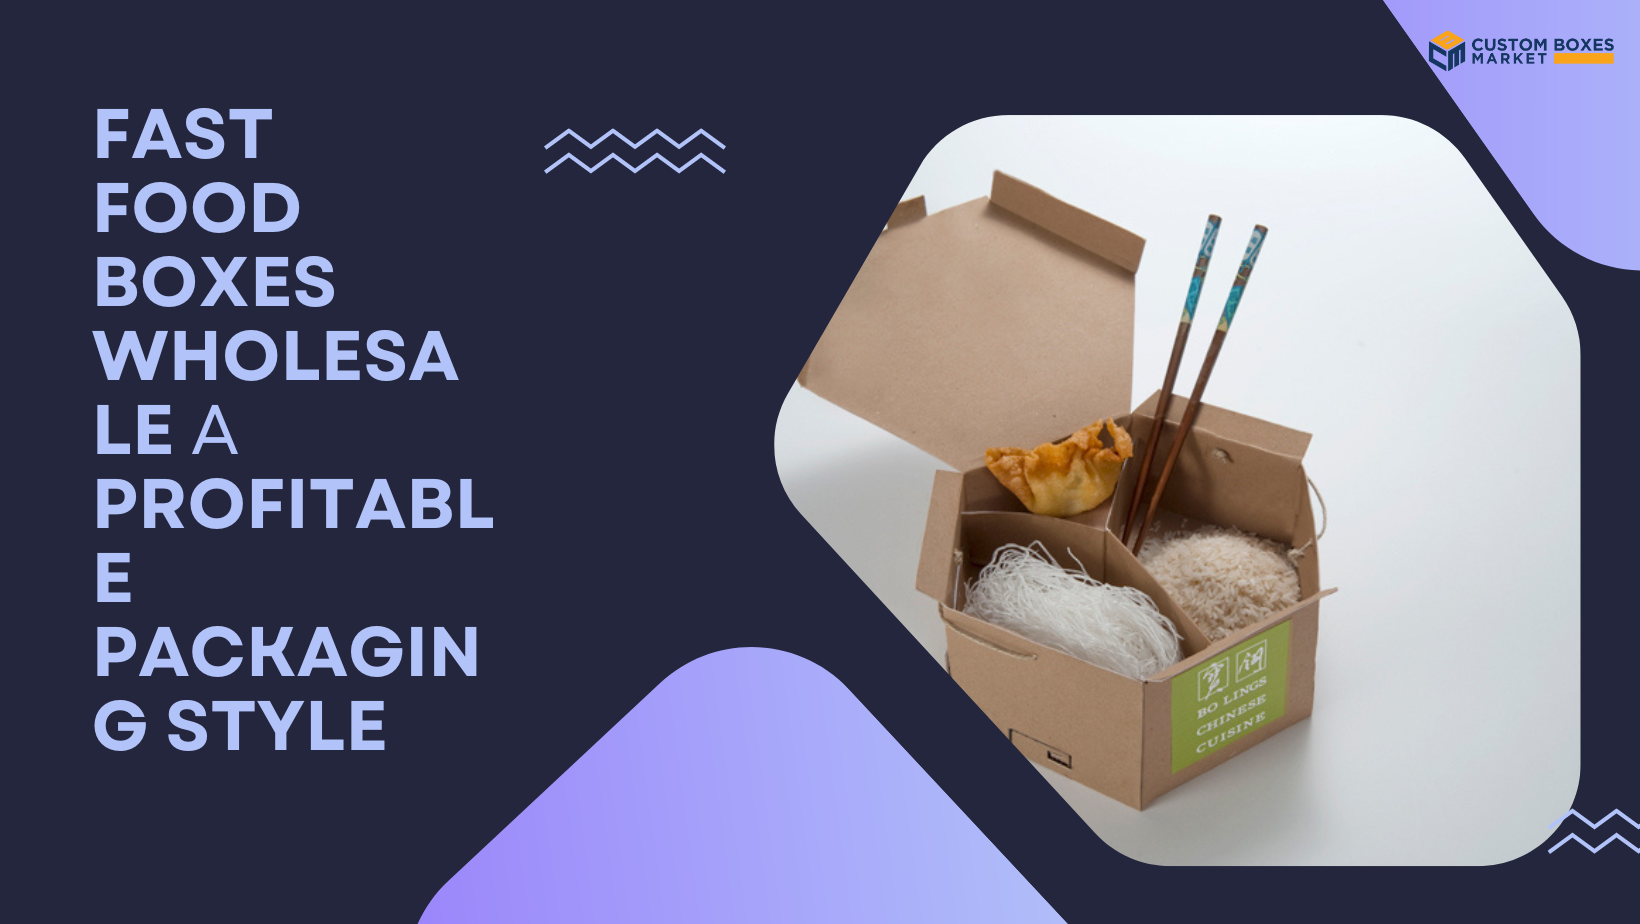 Fast Food Boxes Wholesale: A Profitable Packaging Style